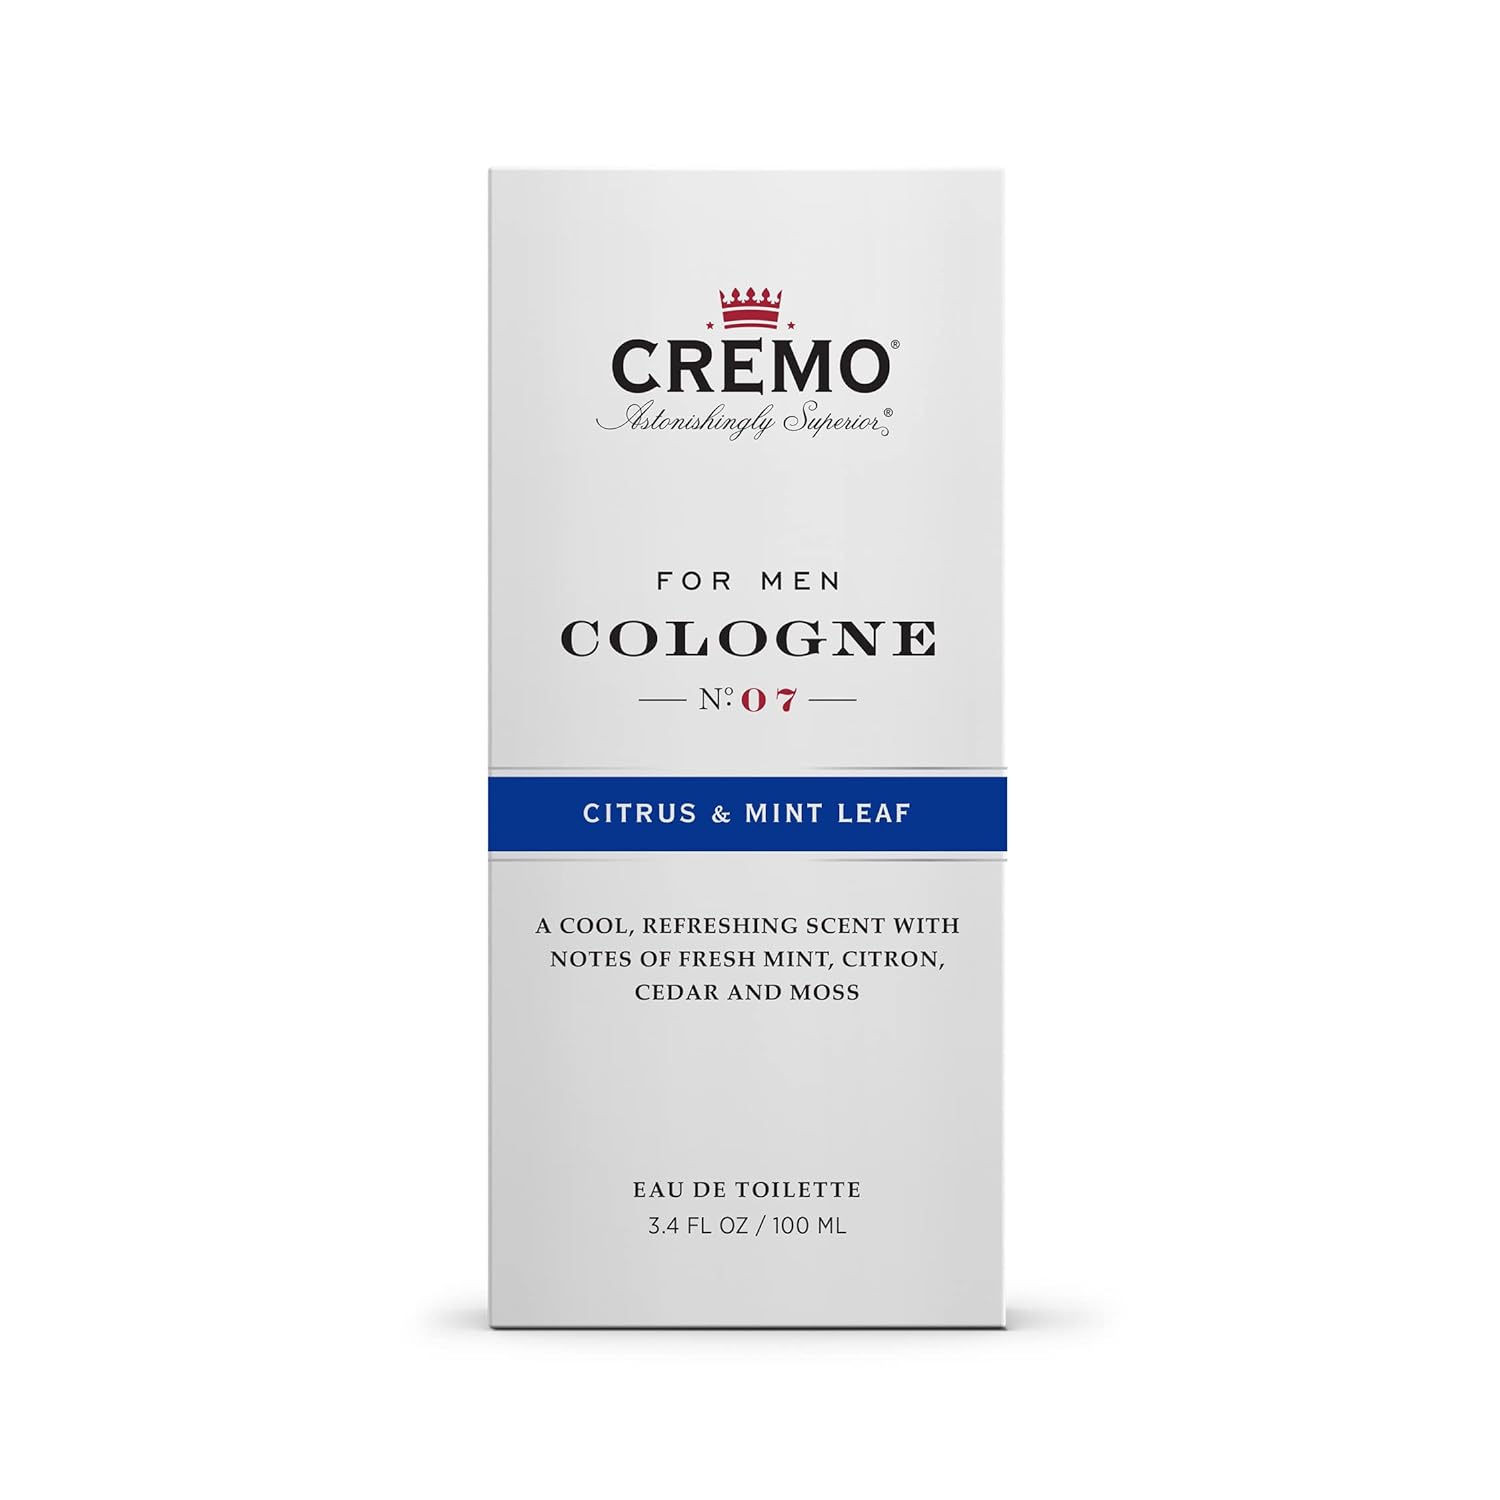 Cremo Citrus & Mint Leaf Cologne Spray, A Cool, Refreshing Scent with Notes of Fresh Mint, Citron, Cedar and Moss, 3.4 Fl Oz : Beauty & Personal Care